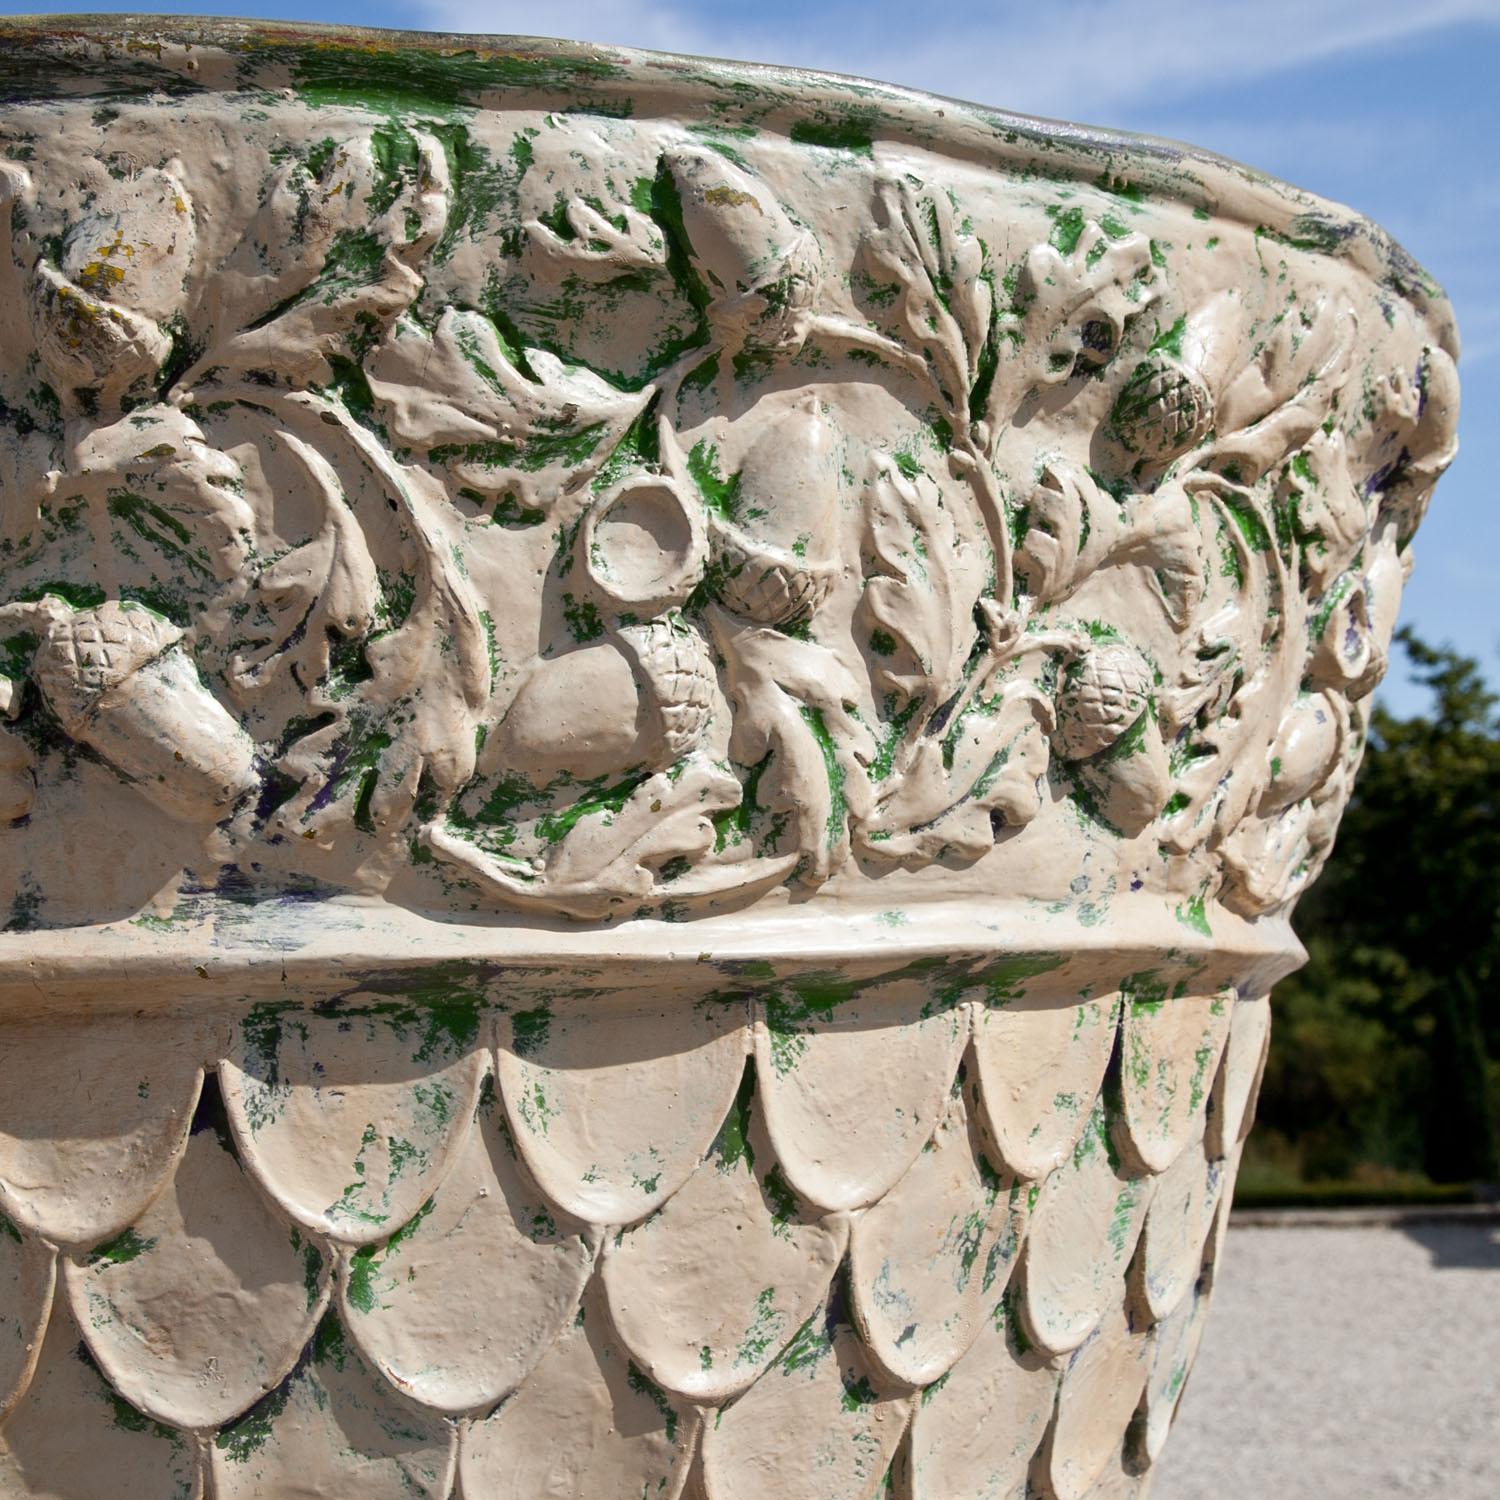 Large fiberglass planter standing on a square plinth. The planter is decorated with vines and scales and shows traces of an old paint.